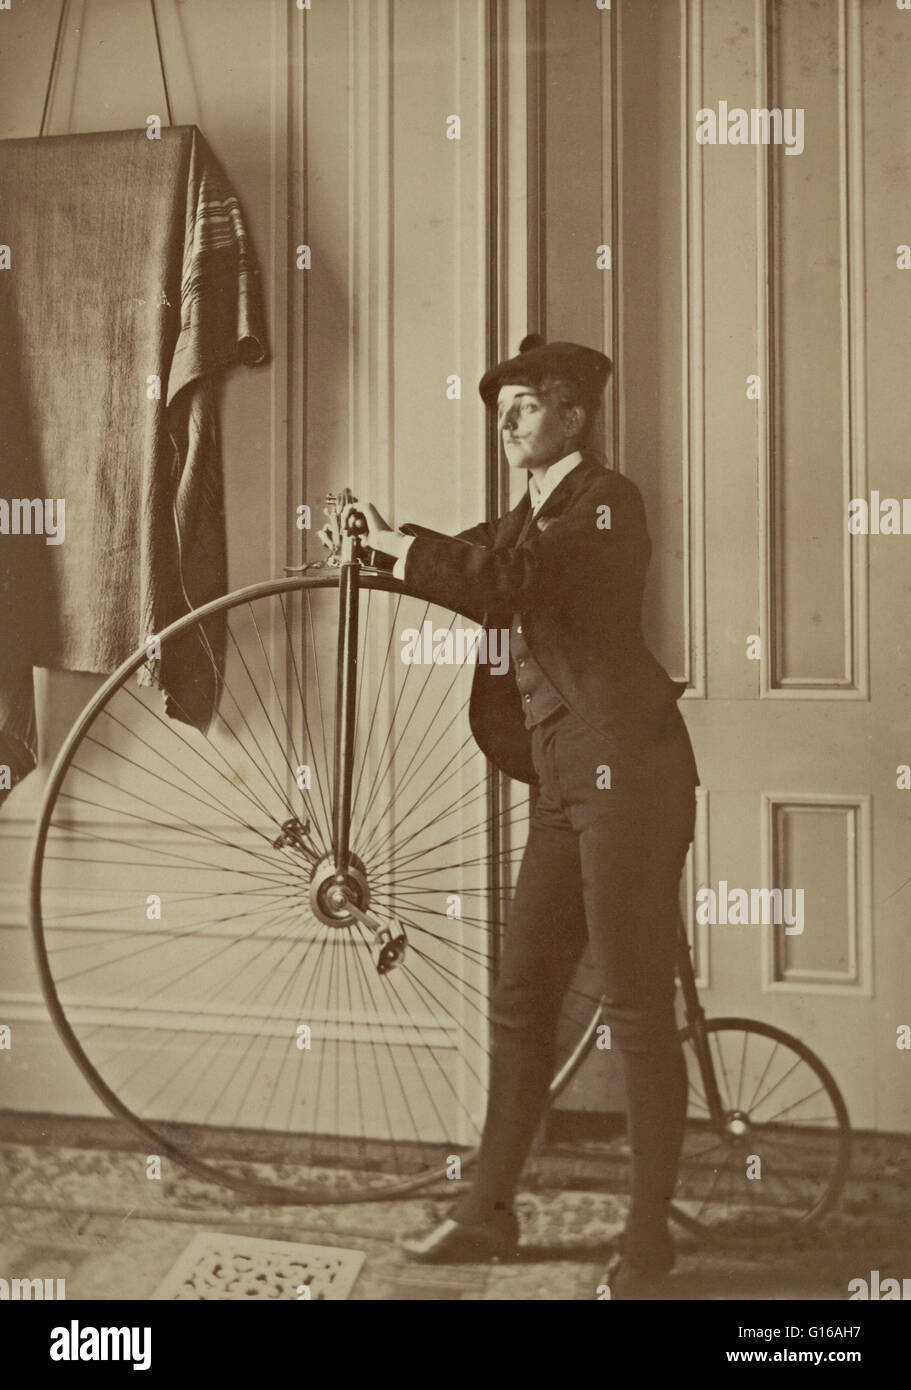 Johnston self-portrait dressed as a man with false moustache, posed with bicycle, circa 1890. Frances 'Fannie' Benjamin Johnston (January 15, 1864 - May 16, 1952) was one of the earliest American female photographers and photojournalists. She was given he Stock Photo